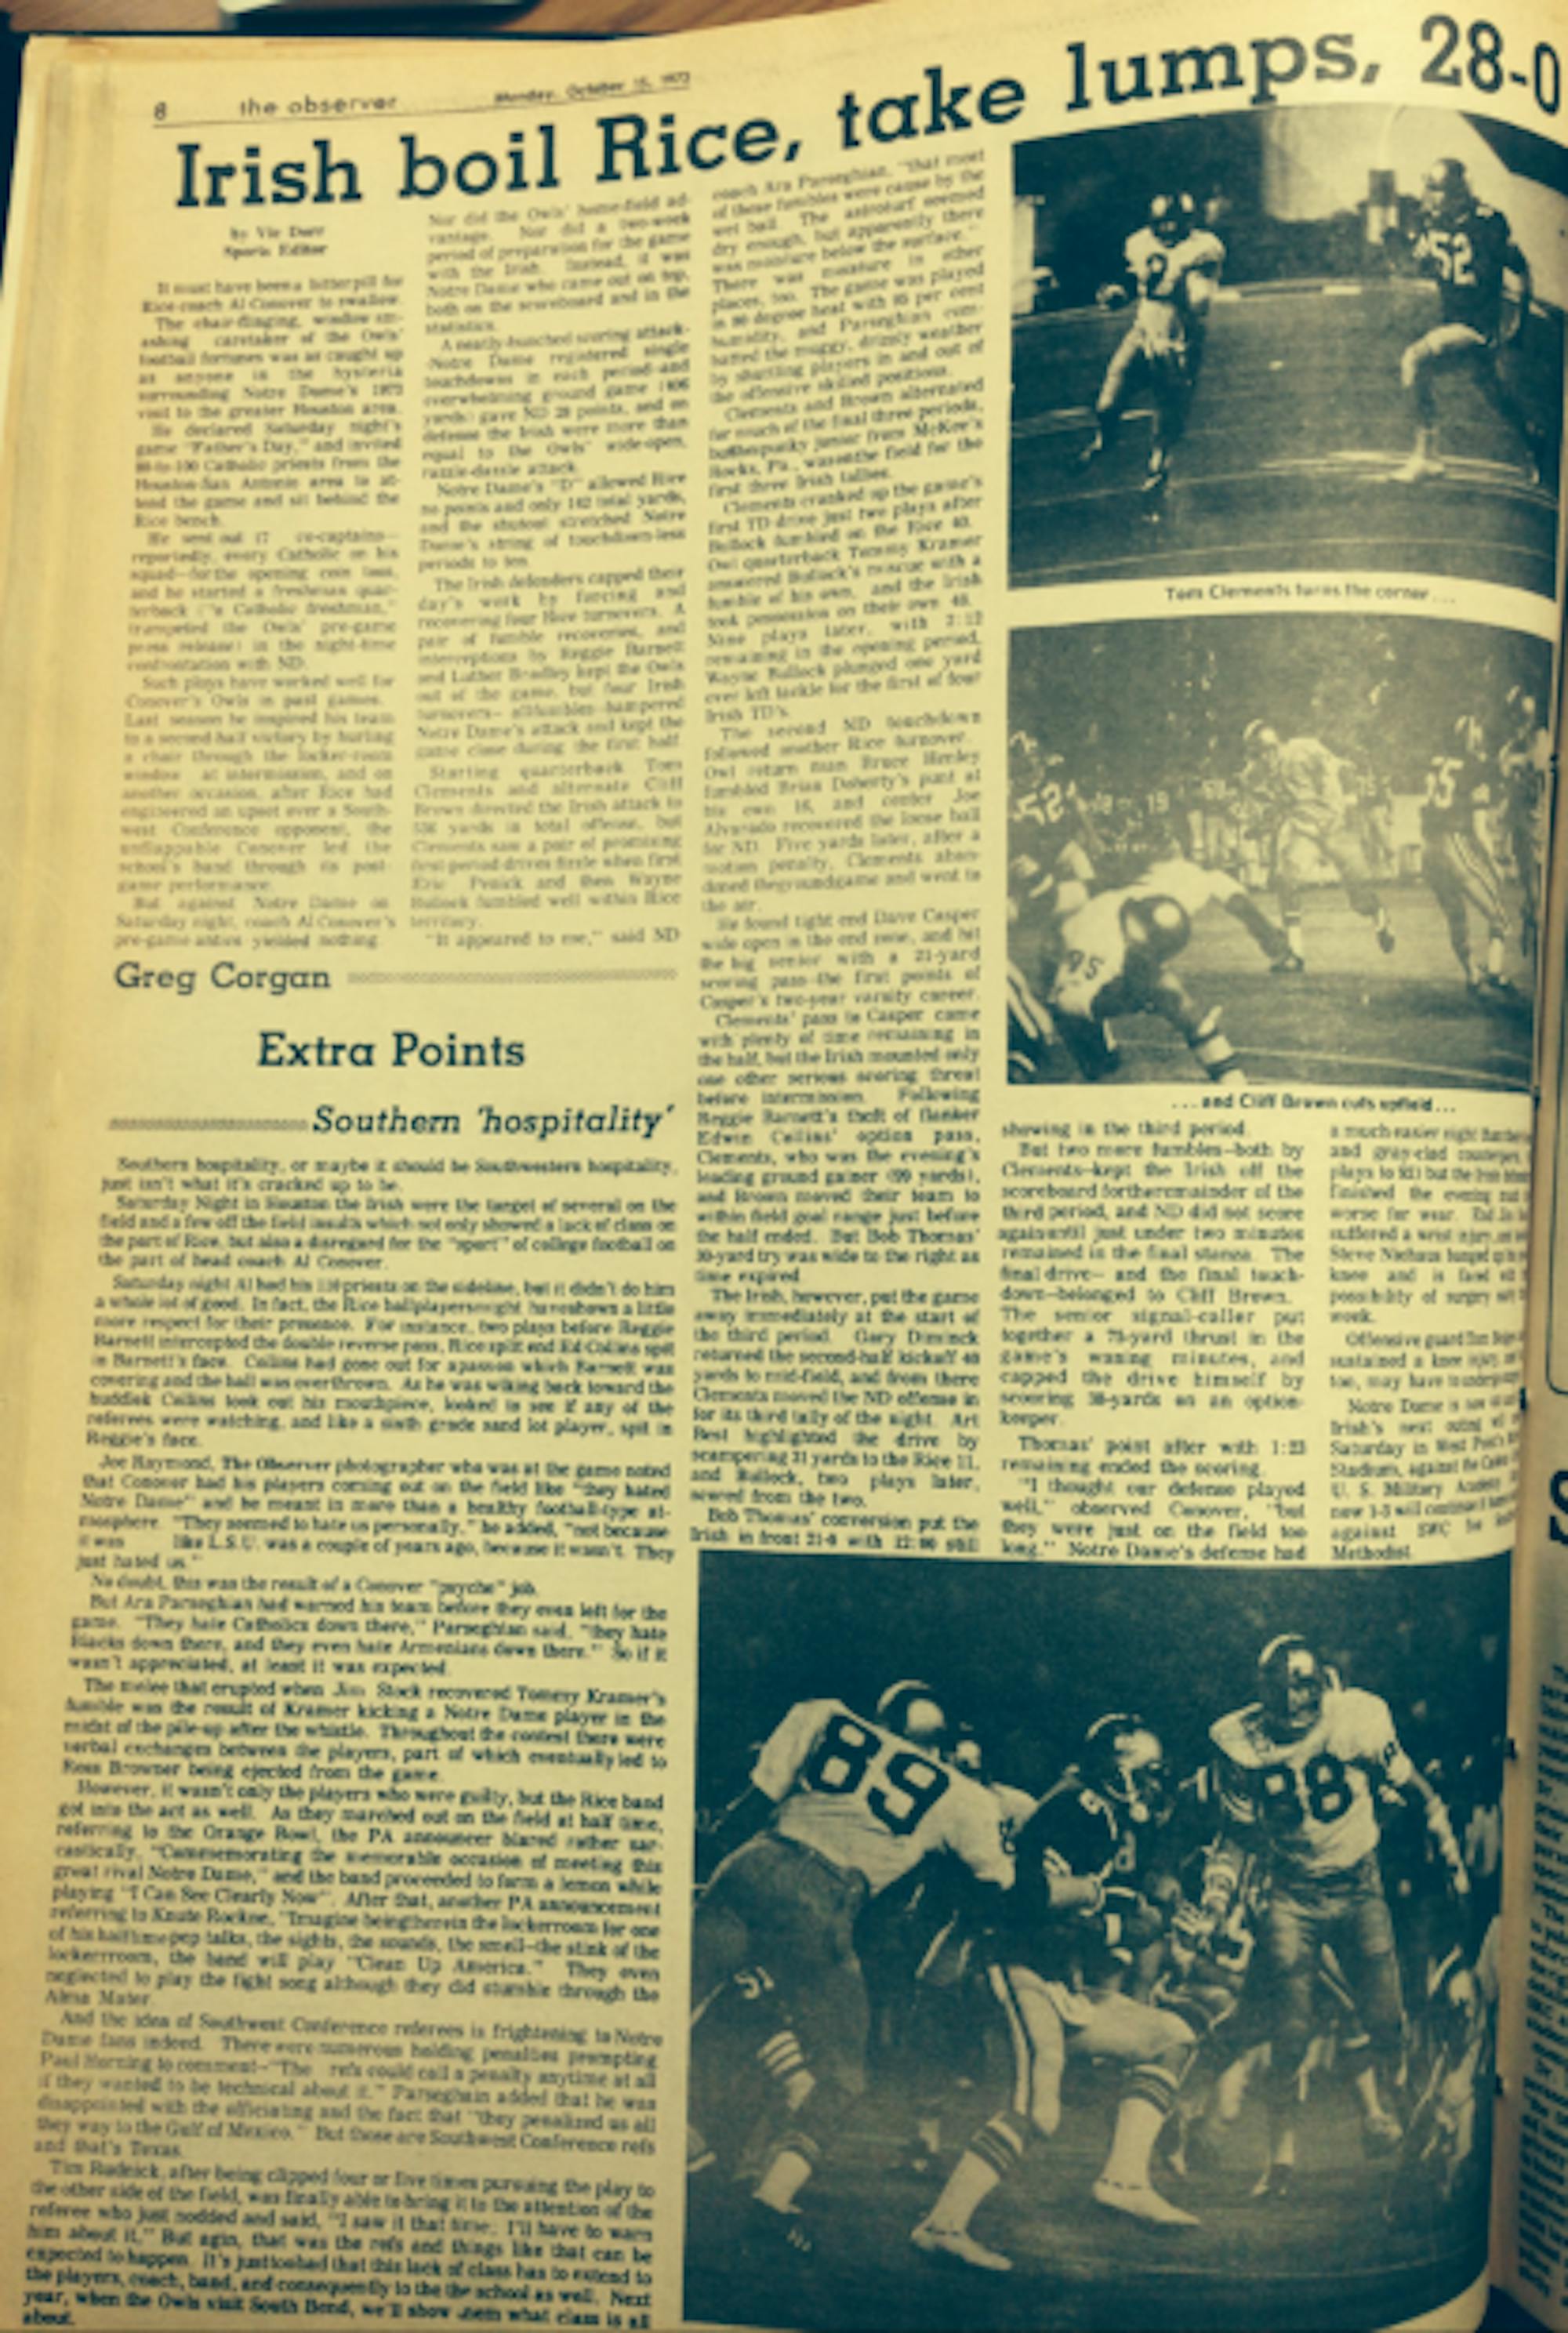 The Observer from Oct. 15, 1973.